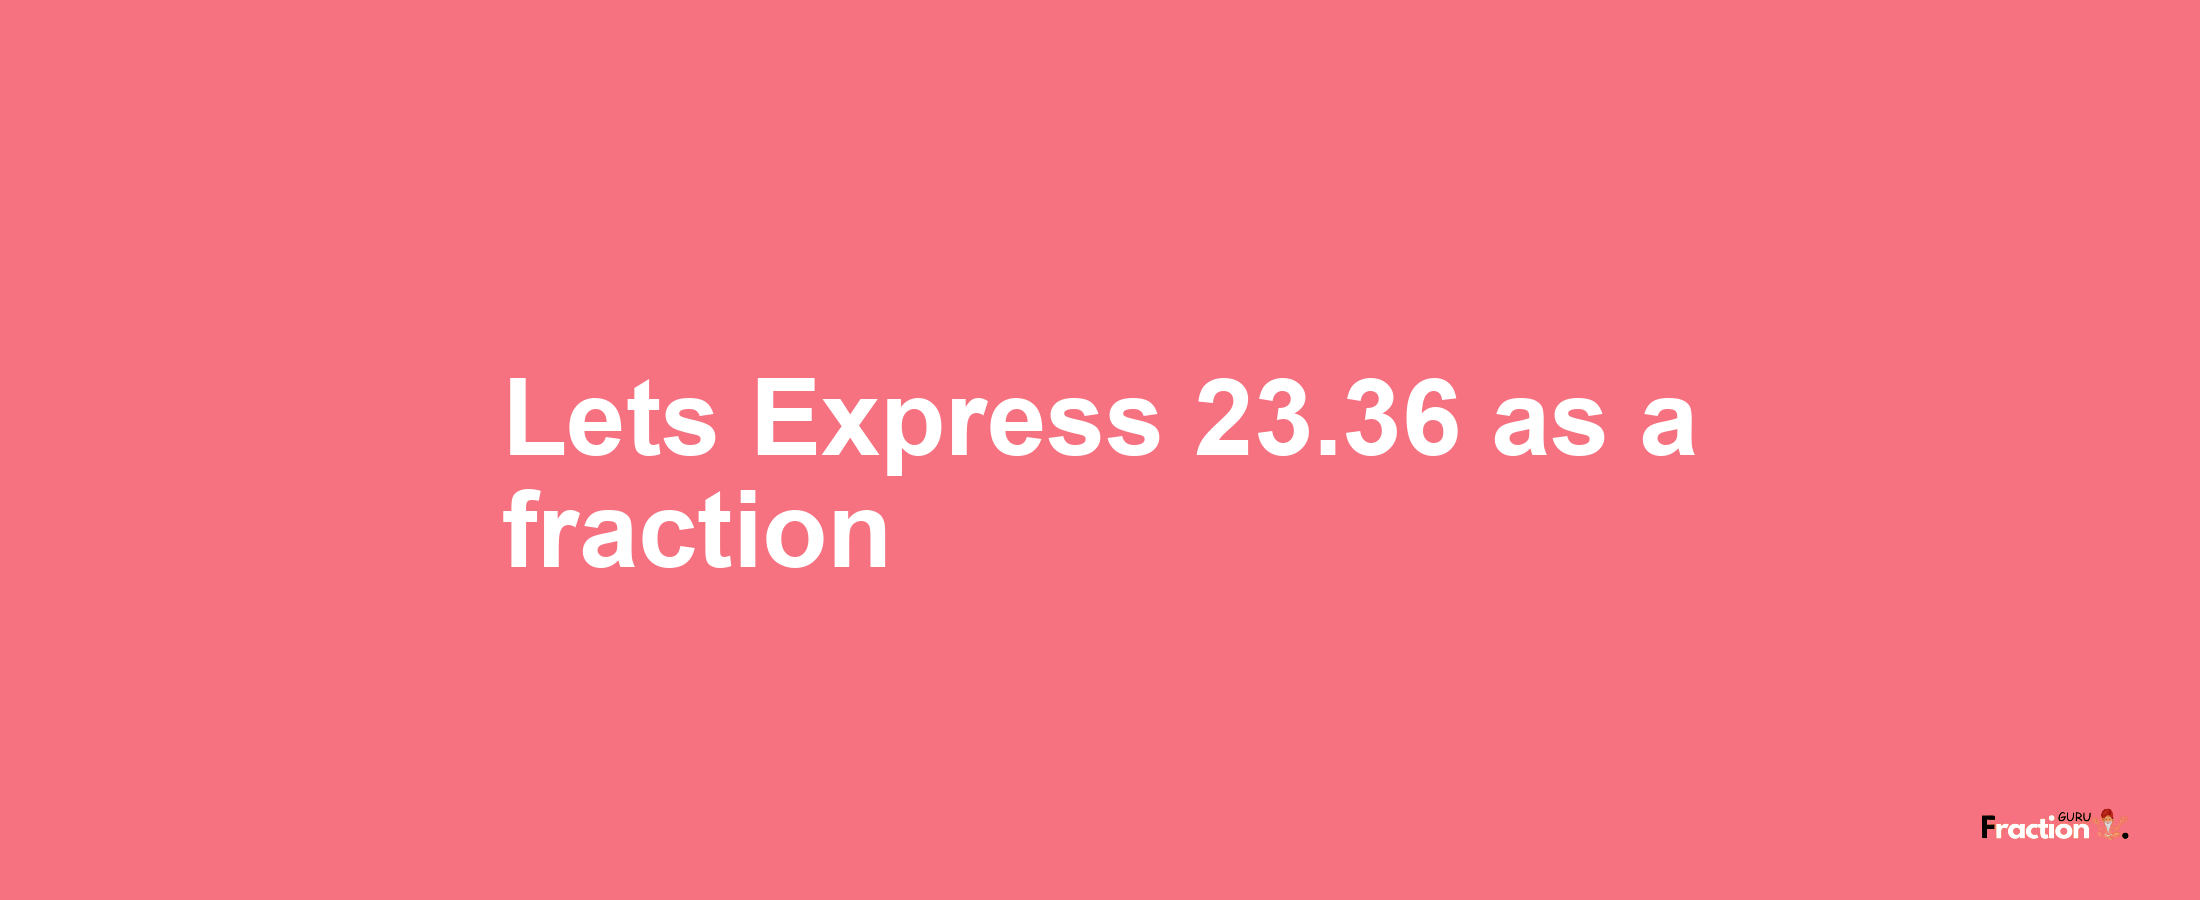 Lets Express 23.36 as afraction